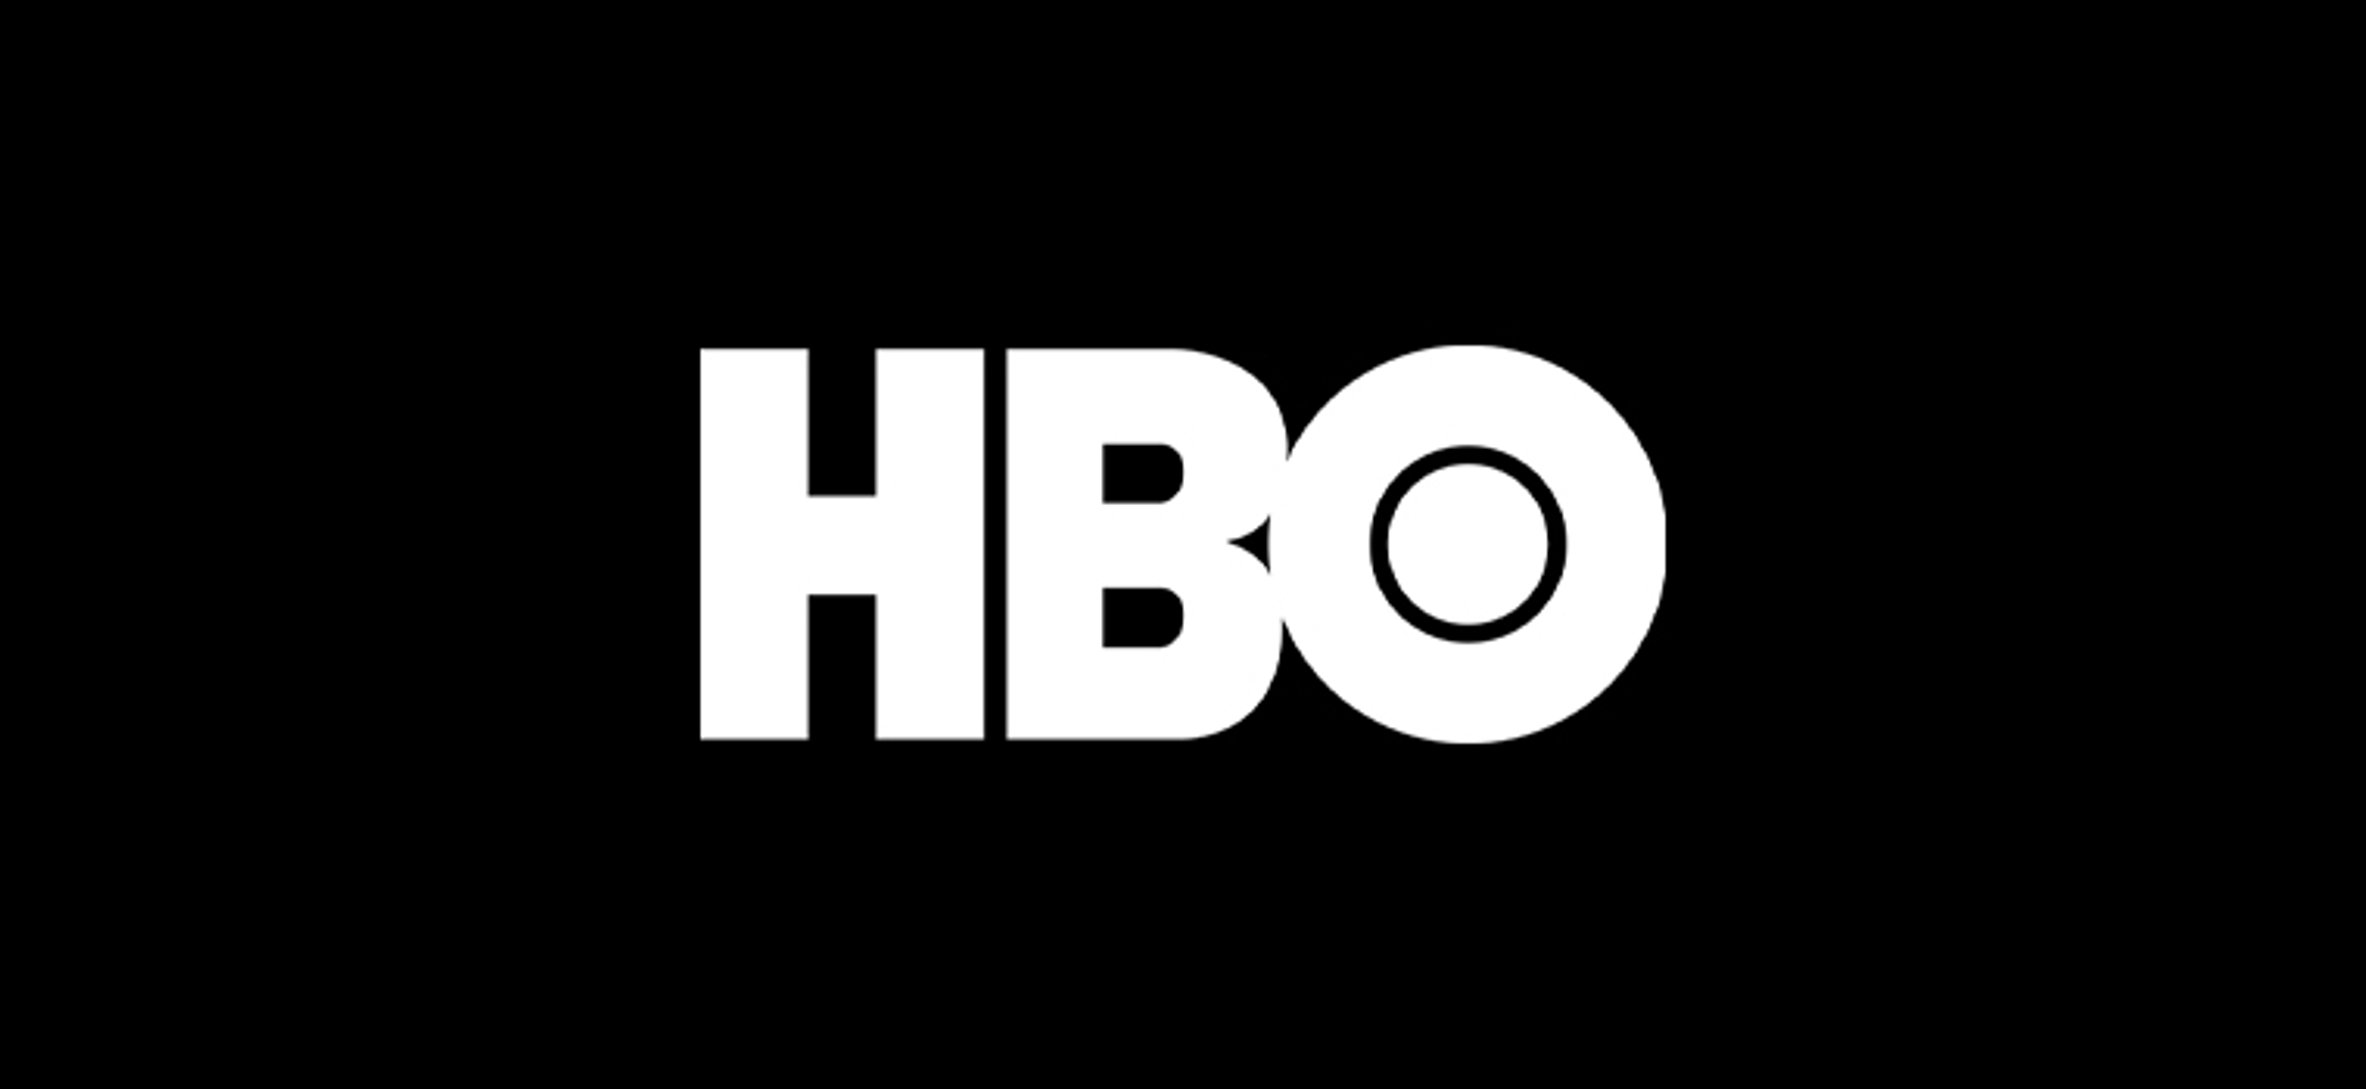 HBO’s Lovecraft Country Produced By Jordan Peele Is Casting For Female Models!